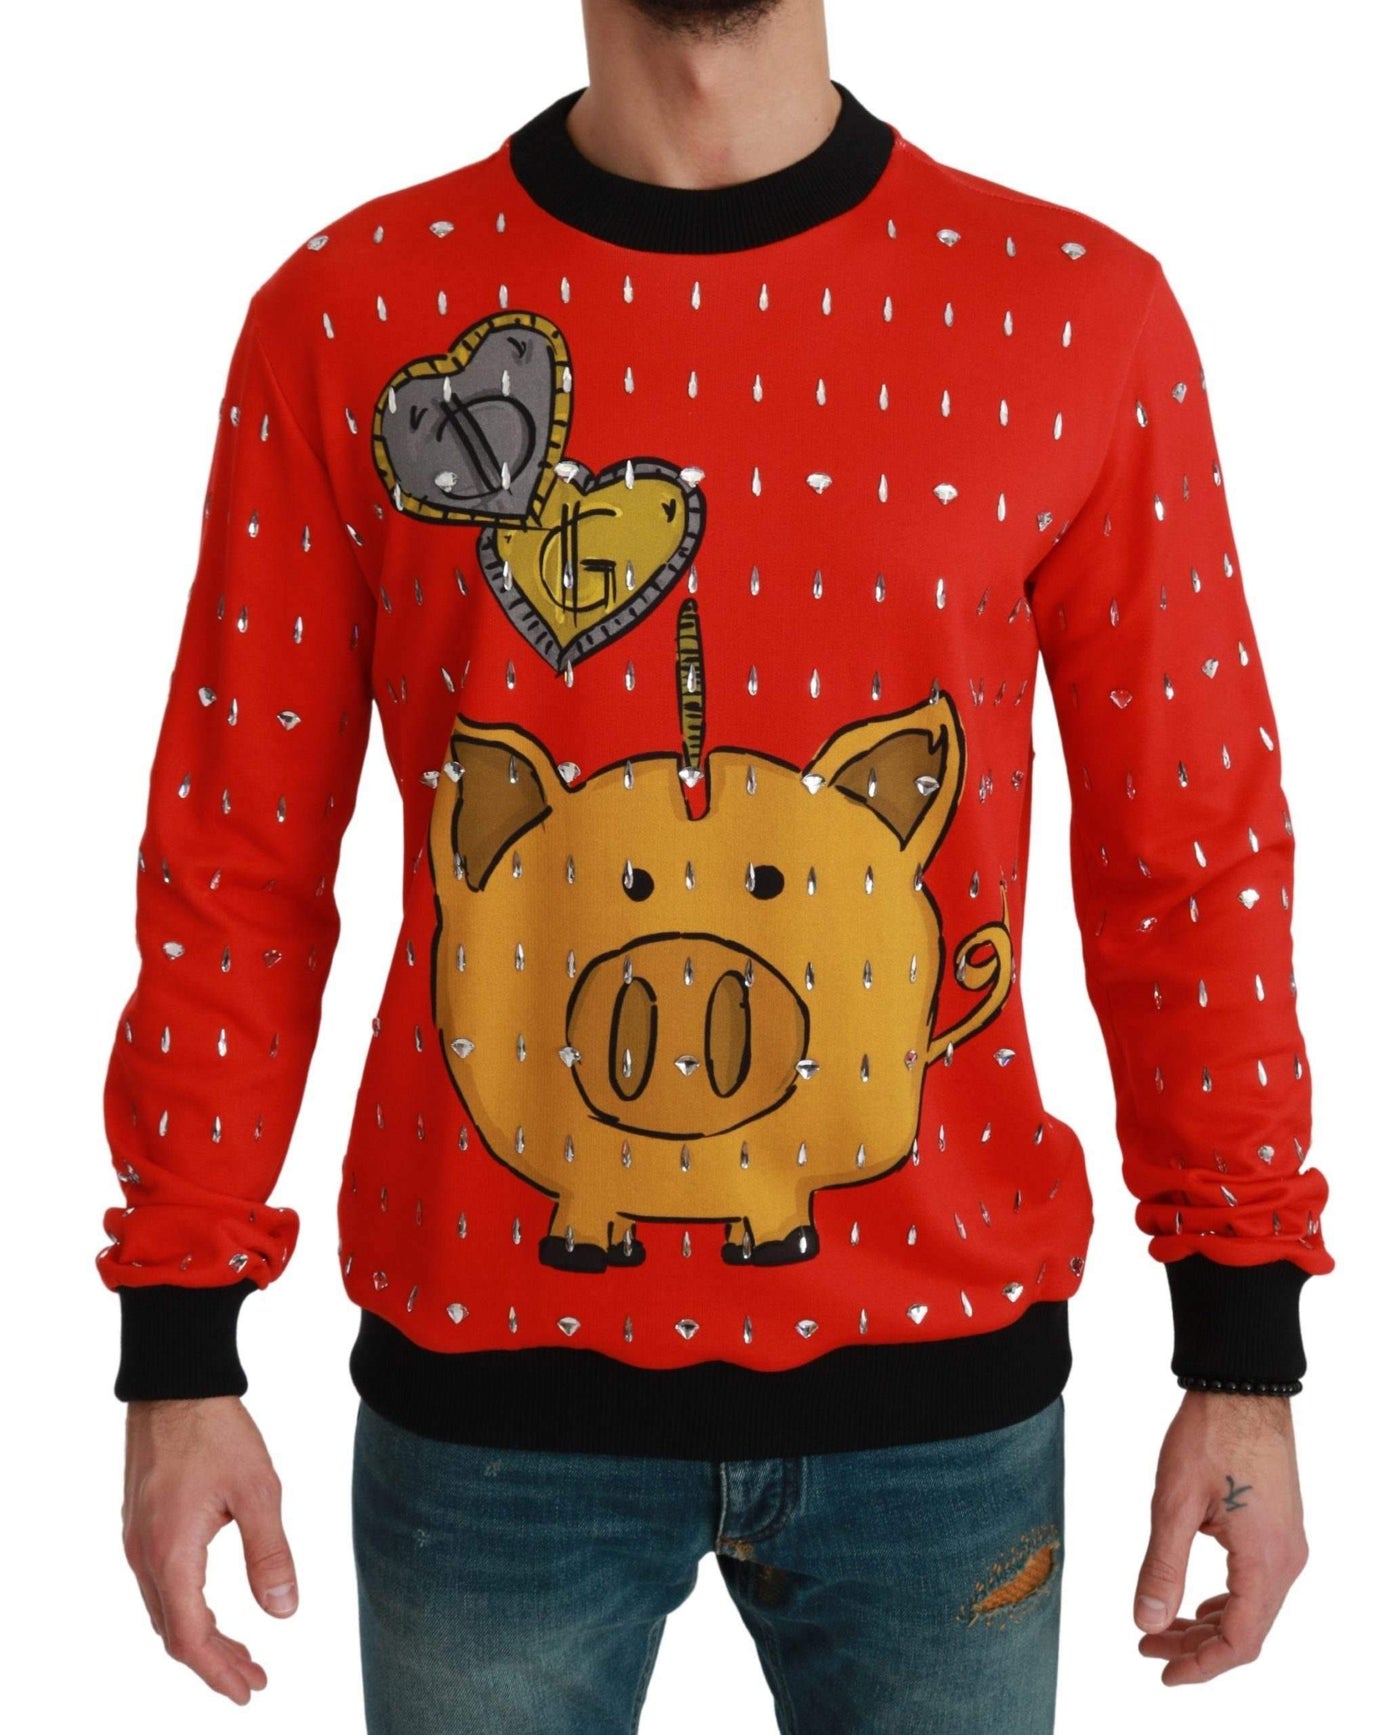 Dolce & Gabbana  Red Crystal Pig of the Year Sweater #men, Brand_Dolce & Gabbana, Catch, Dolce & Gabbana, feed-agegroup-adult, feed-color-red, feed-gender-male, feed-size-IT44 | XS, feed-size-IT46 | S, feed-size-IT48 | M, feed-size-IT50 | L, feed-size-IT52 | L, feed-size-IT54 | XL, feed-size-IT56 | XXL, Gender_Men, IT44 | XS, IT46 | S, IT48 | M, IT50 | L, IT52 | L, IT54 | XL, IT56 | XXL, Kogan, Men - New Arrivals, Red, Sweaters - Men - Clothing at SEYMAYKA